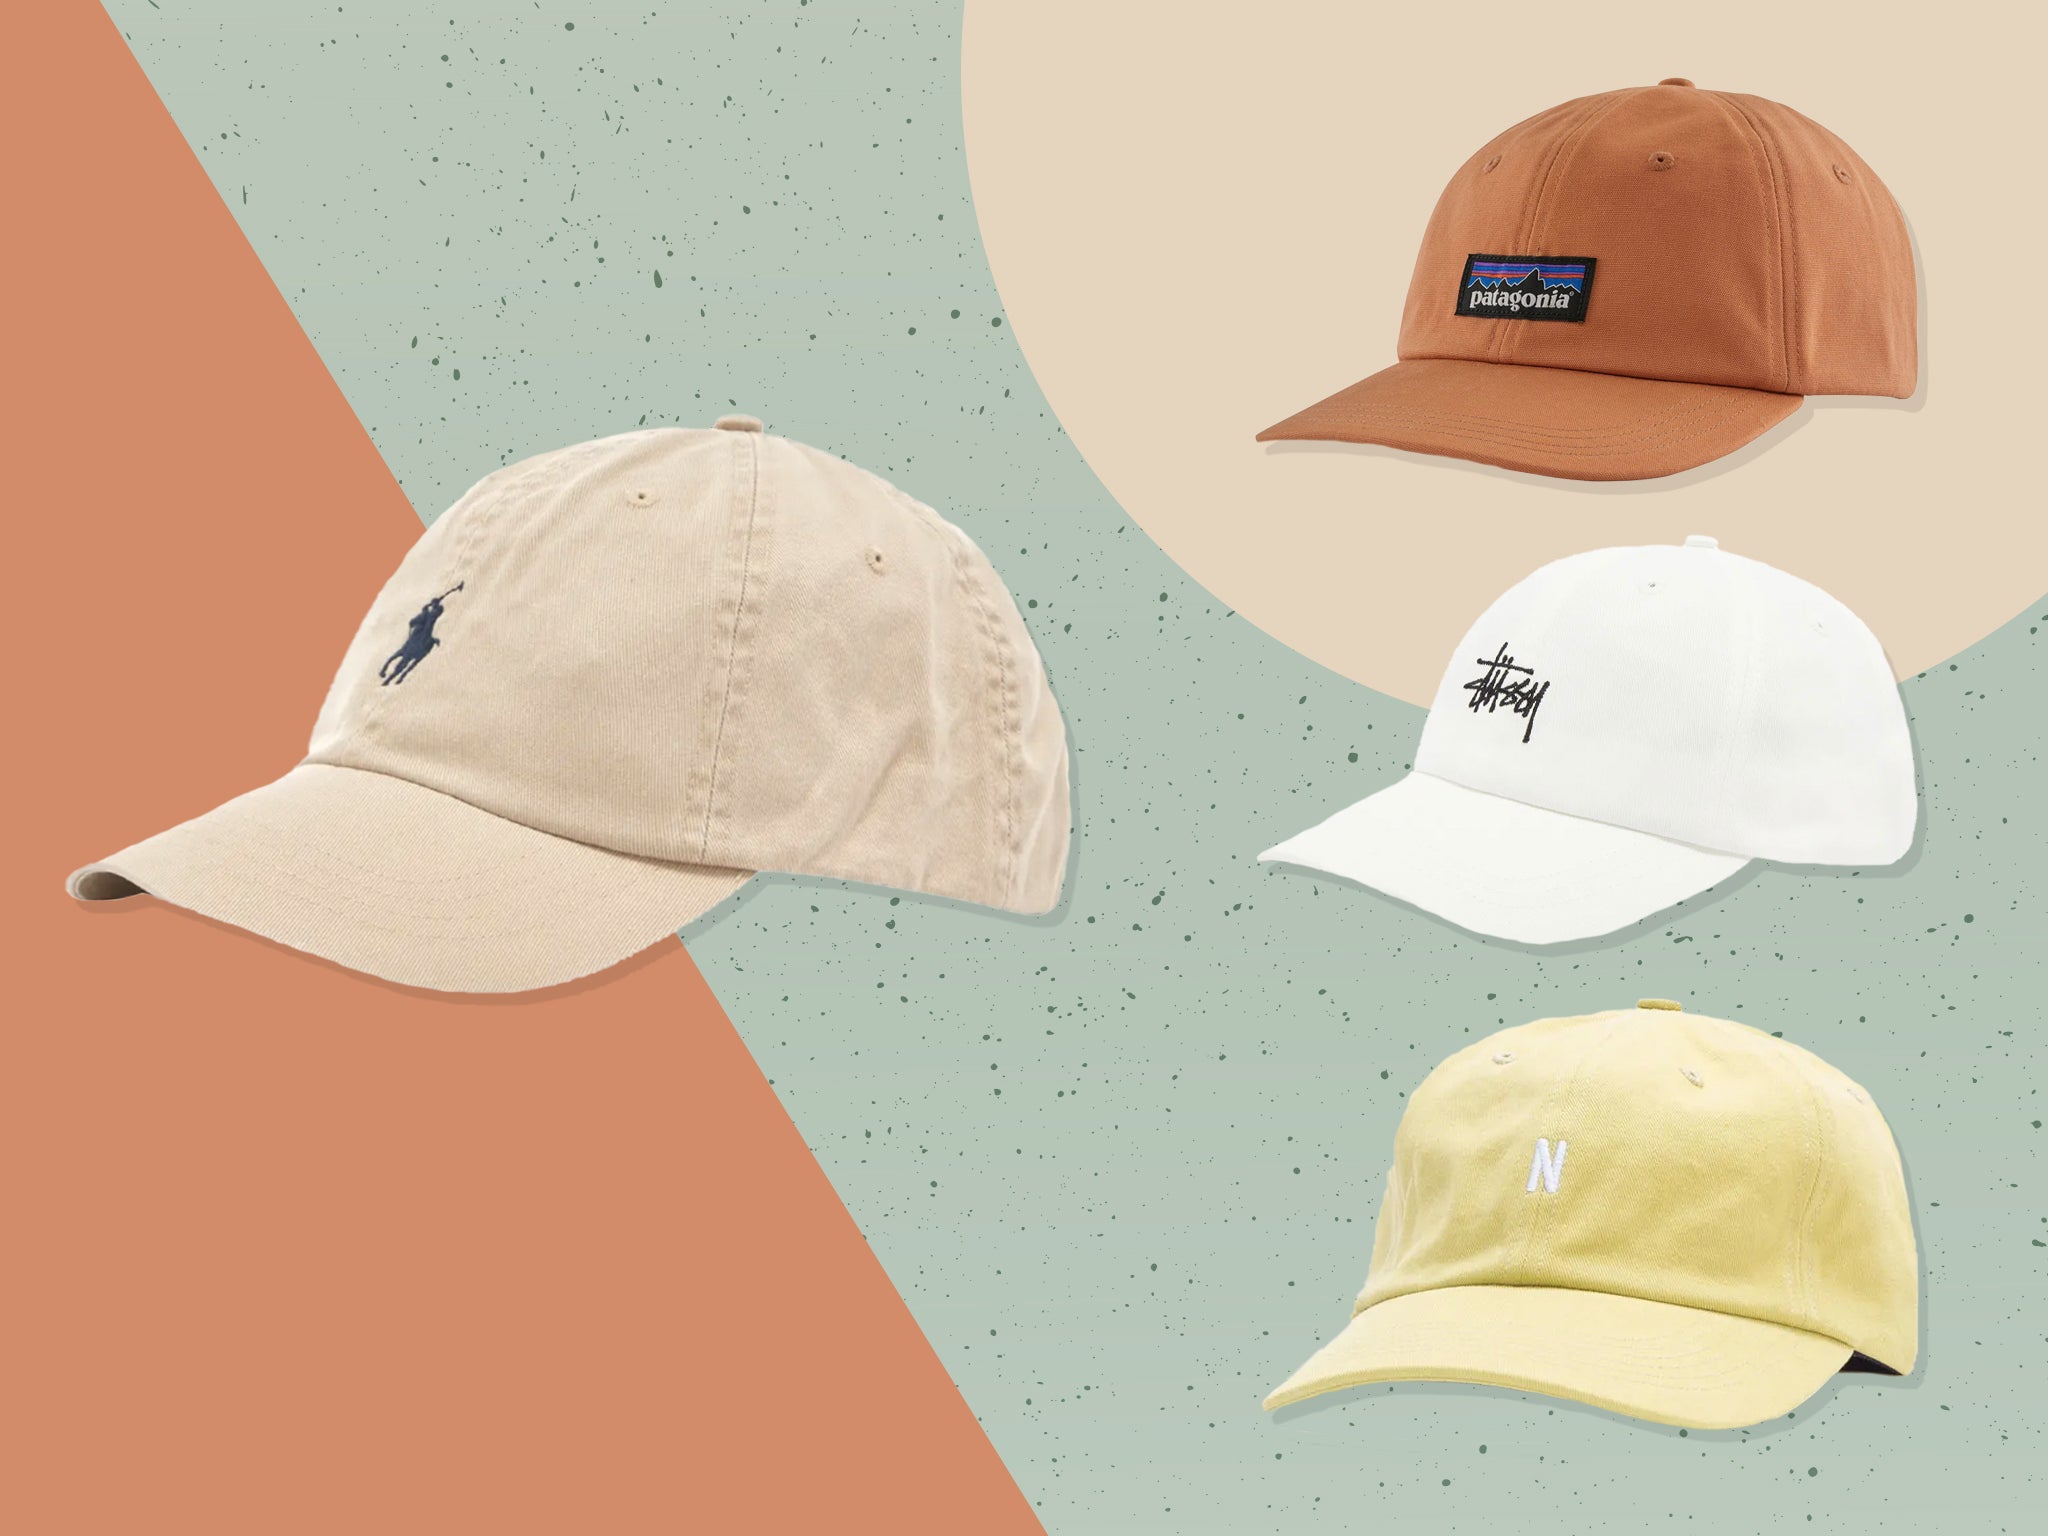 Best baseball caps for men 2021: Top baseball hats from Uniqlo